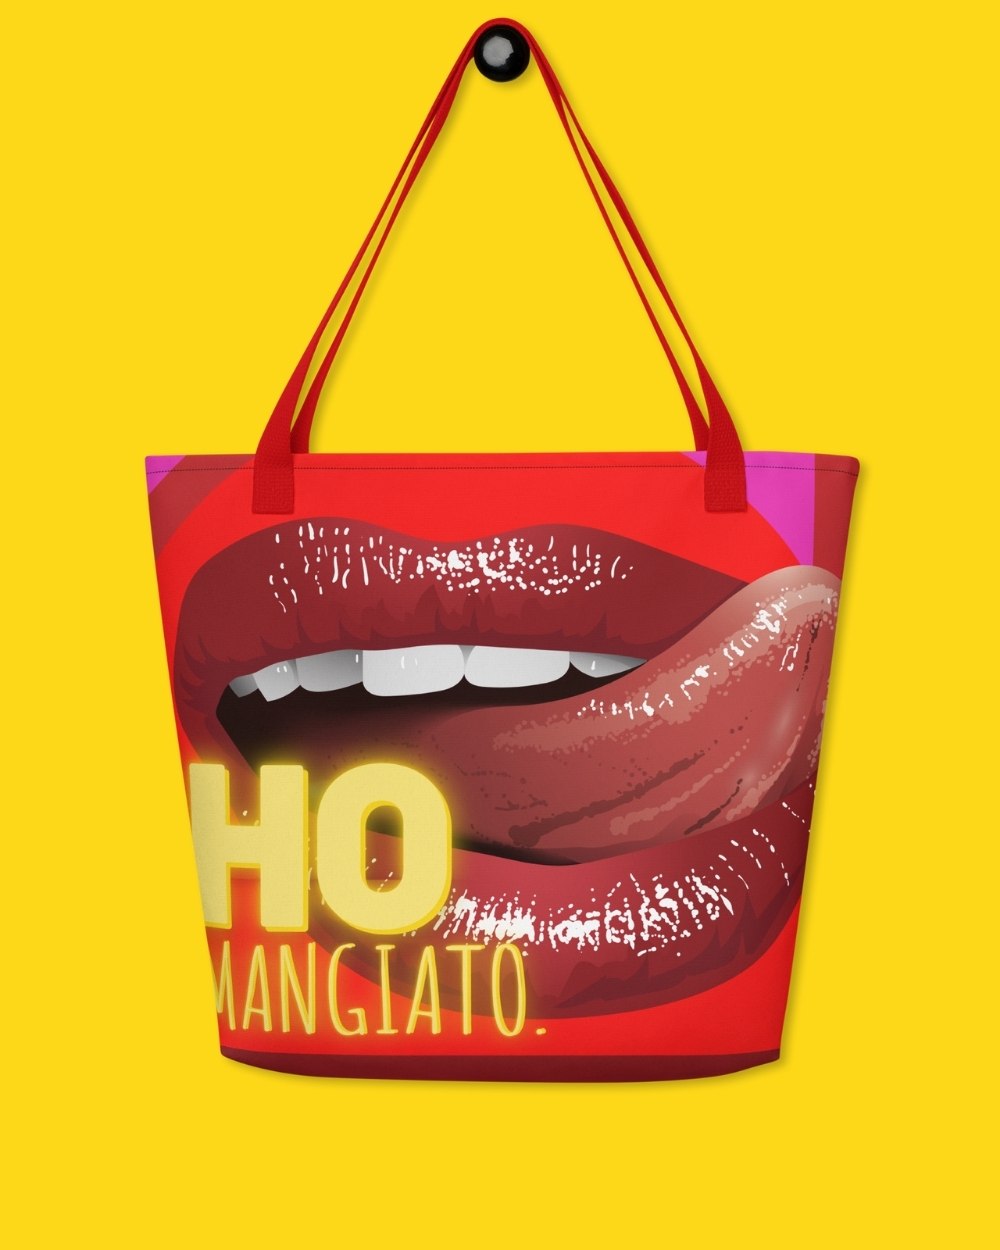 Our "Ho Mangiato" design has red as its main colour. On one side you see a laughing mouth with the question "Hai mangiato?", on the other side "ho mangiato", meaning "Have you eaten?" and "I have eaten". 